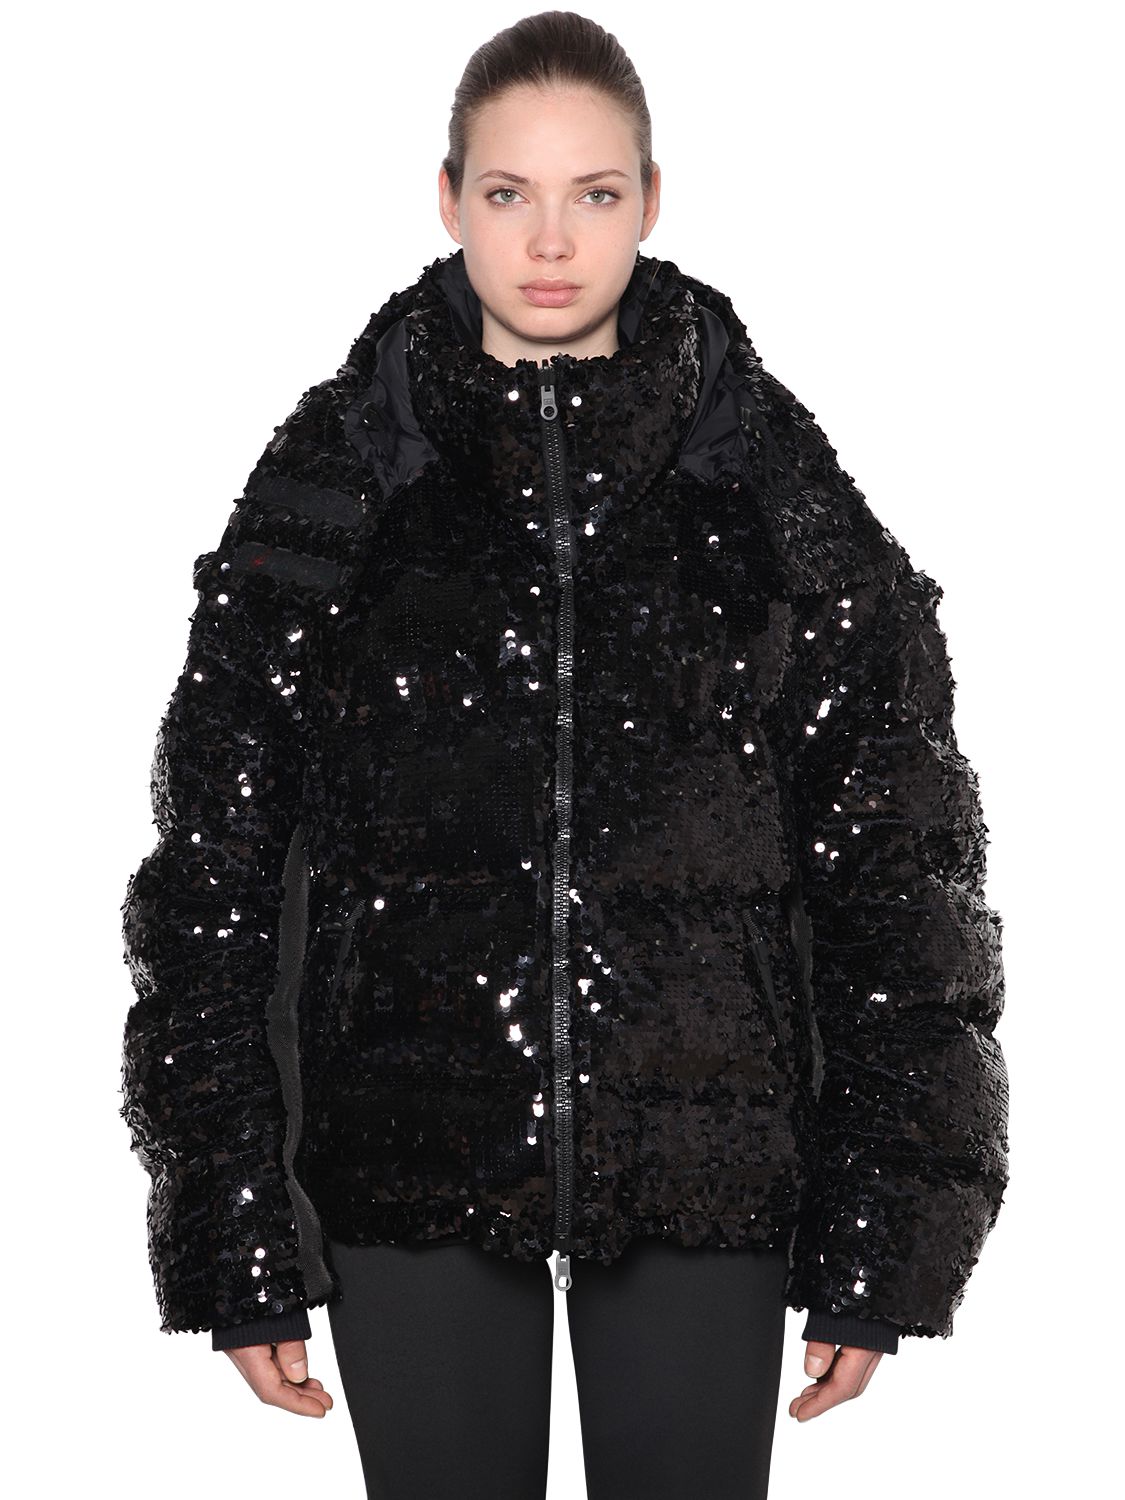 FAITH CONNEXION REVERSIBLE SEQUINED DOWN JACKET,68ID5G026-MDAX0